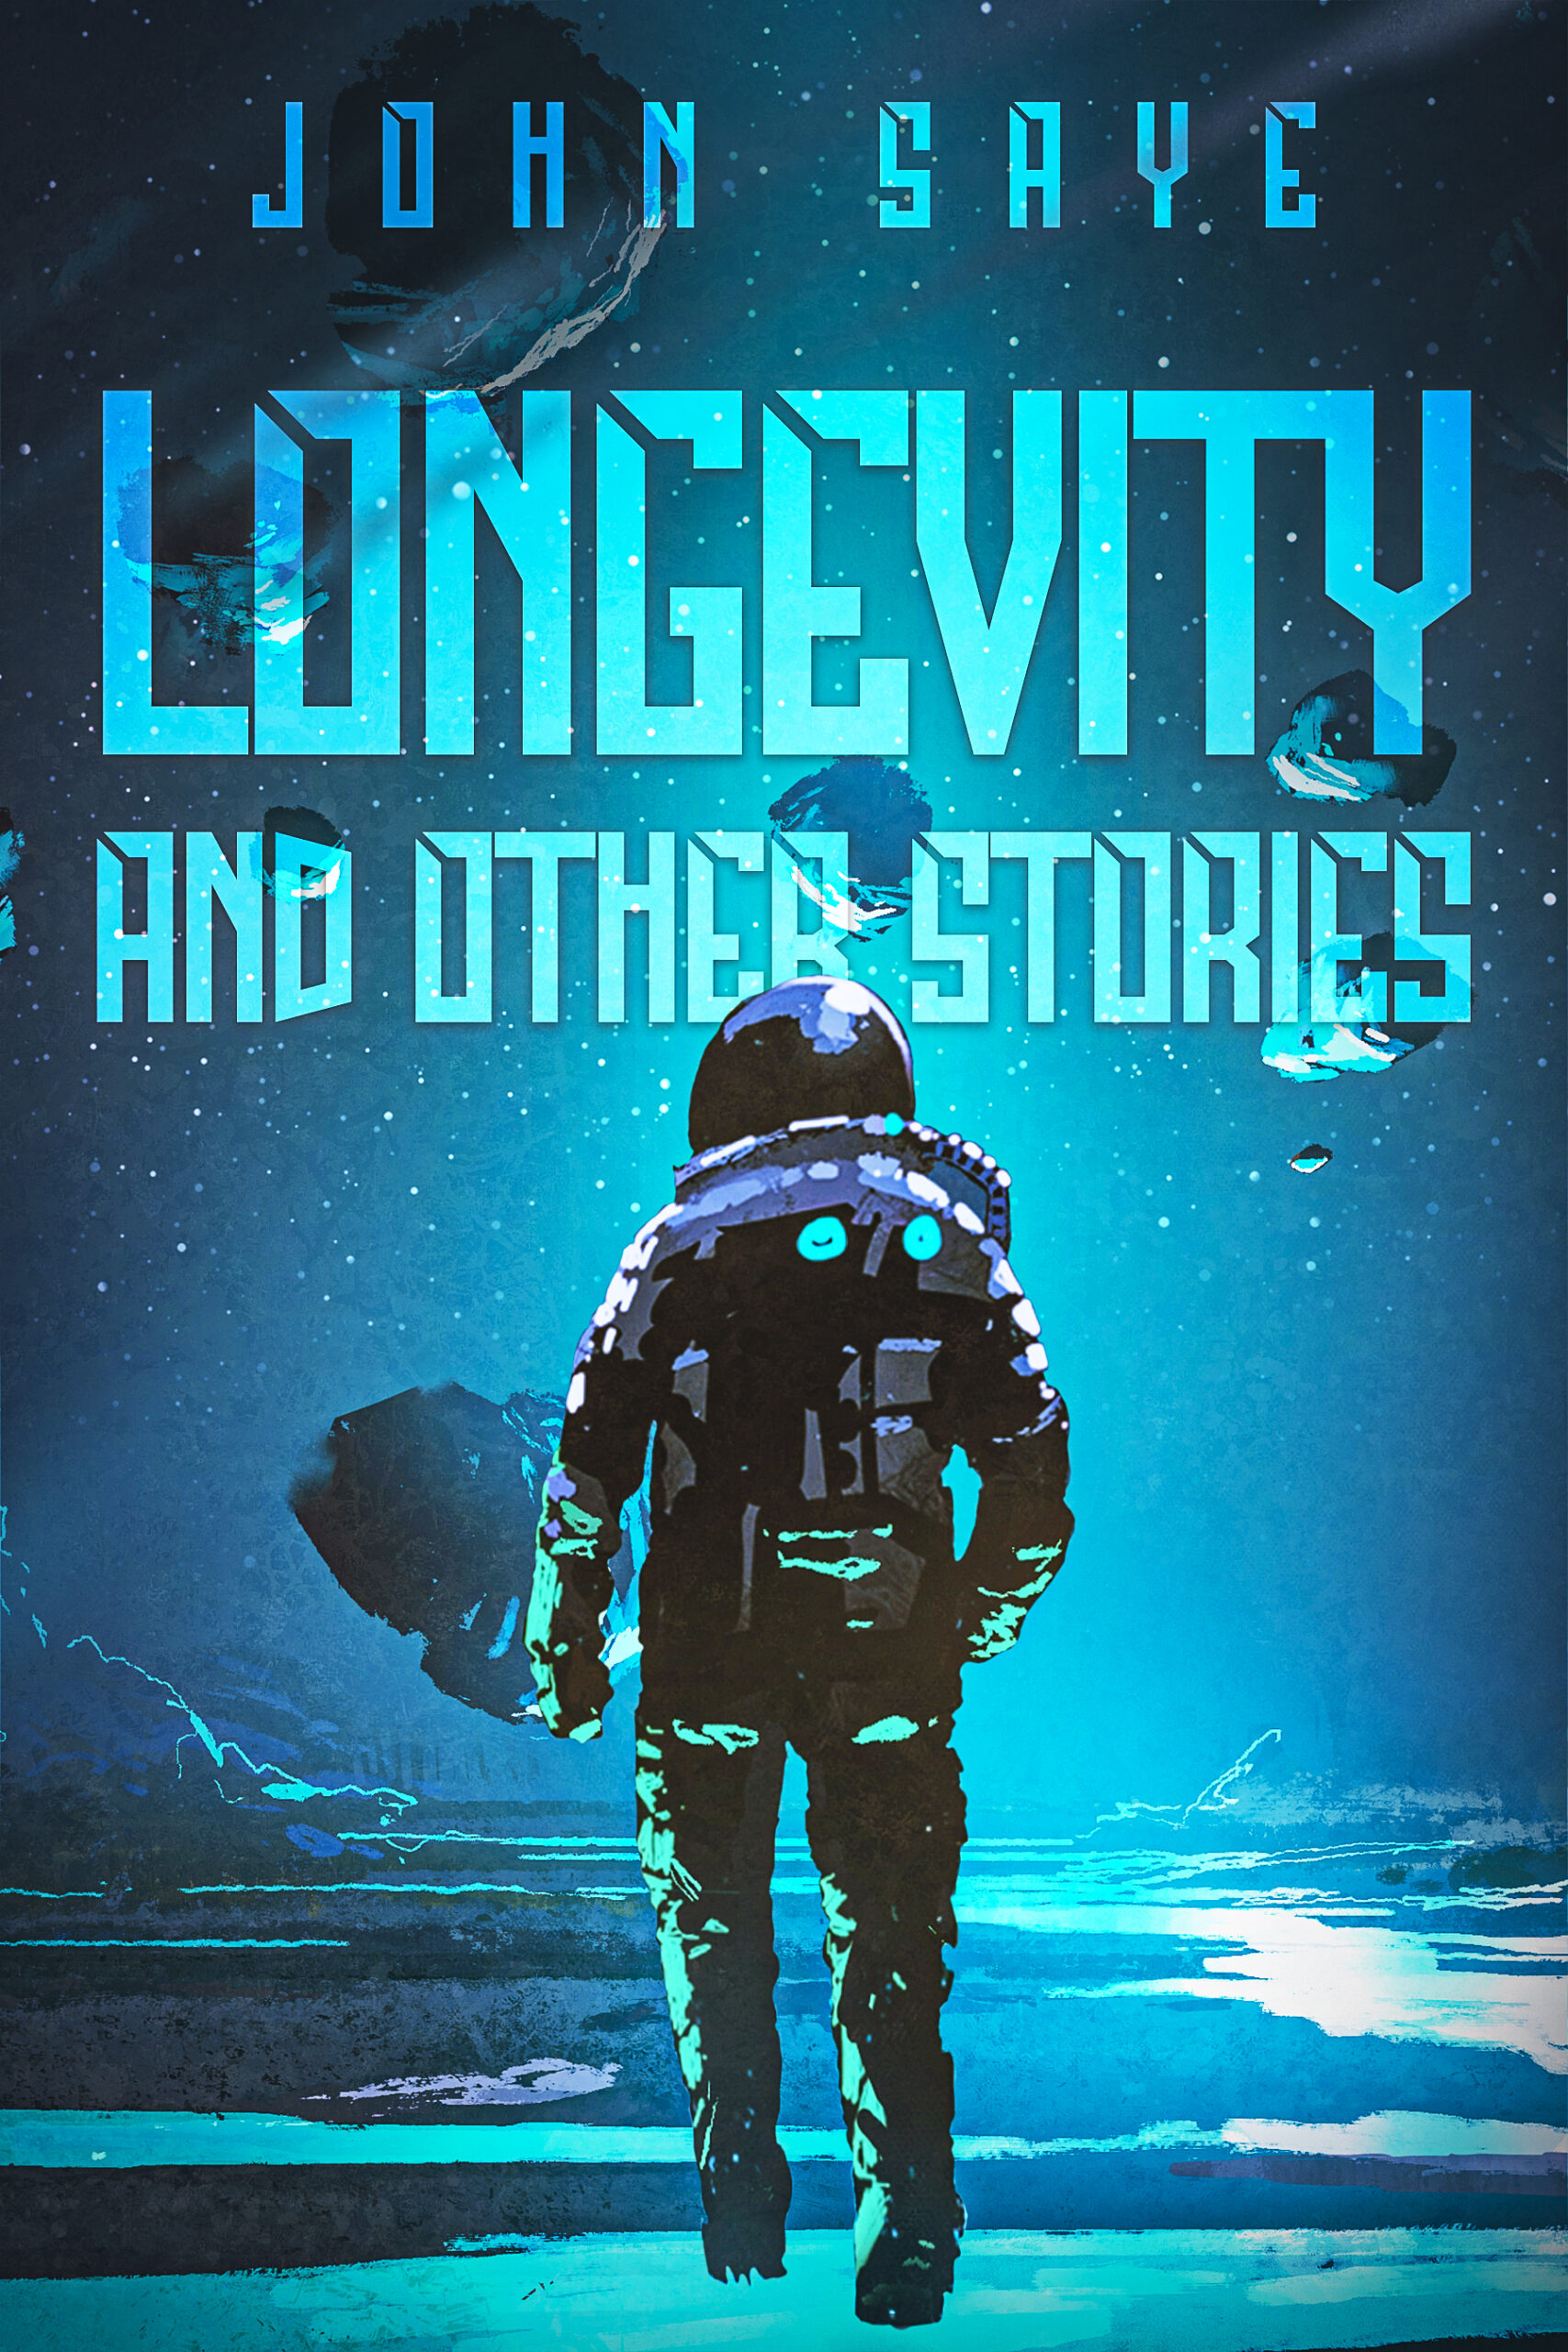 Longevity and Other Stories